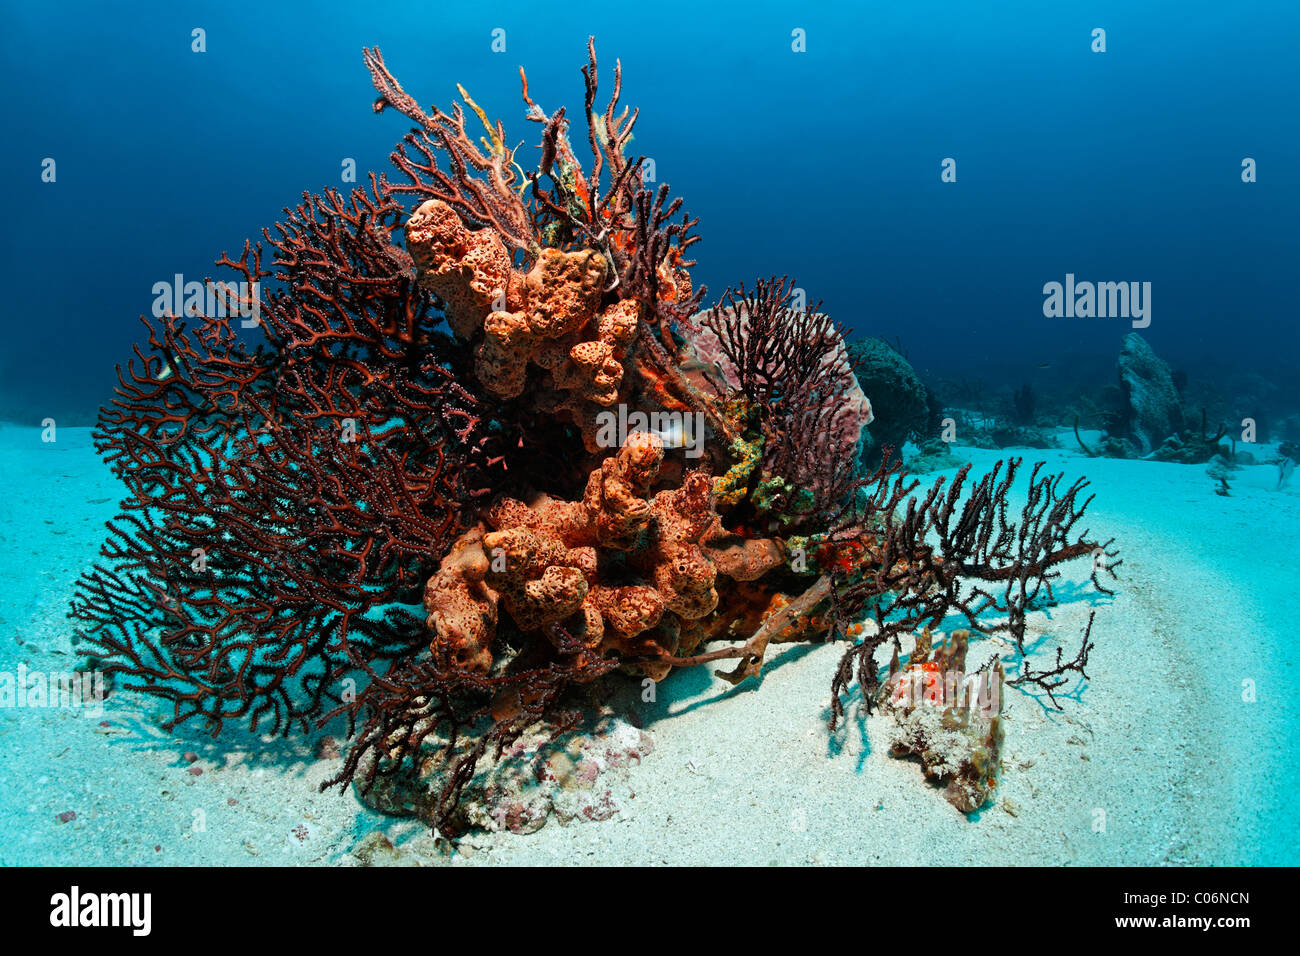 Reef block, coral reef, overgrown, multicolor, sorts, sponges, corals, sand ground, Little Tobago, Speyside, Trinidad and Tobago Stock Photo